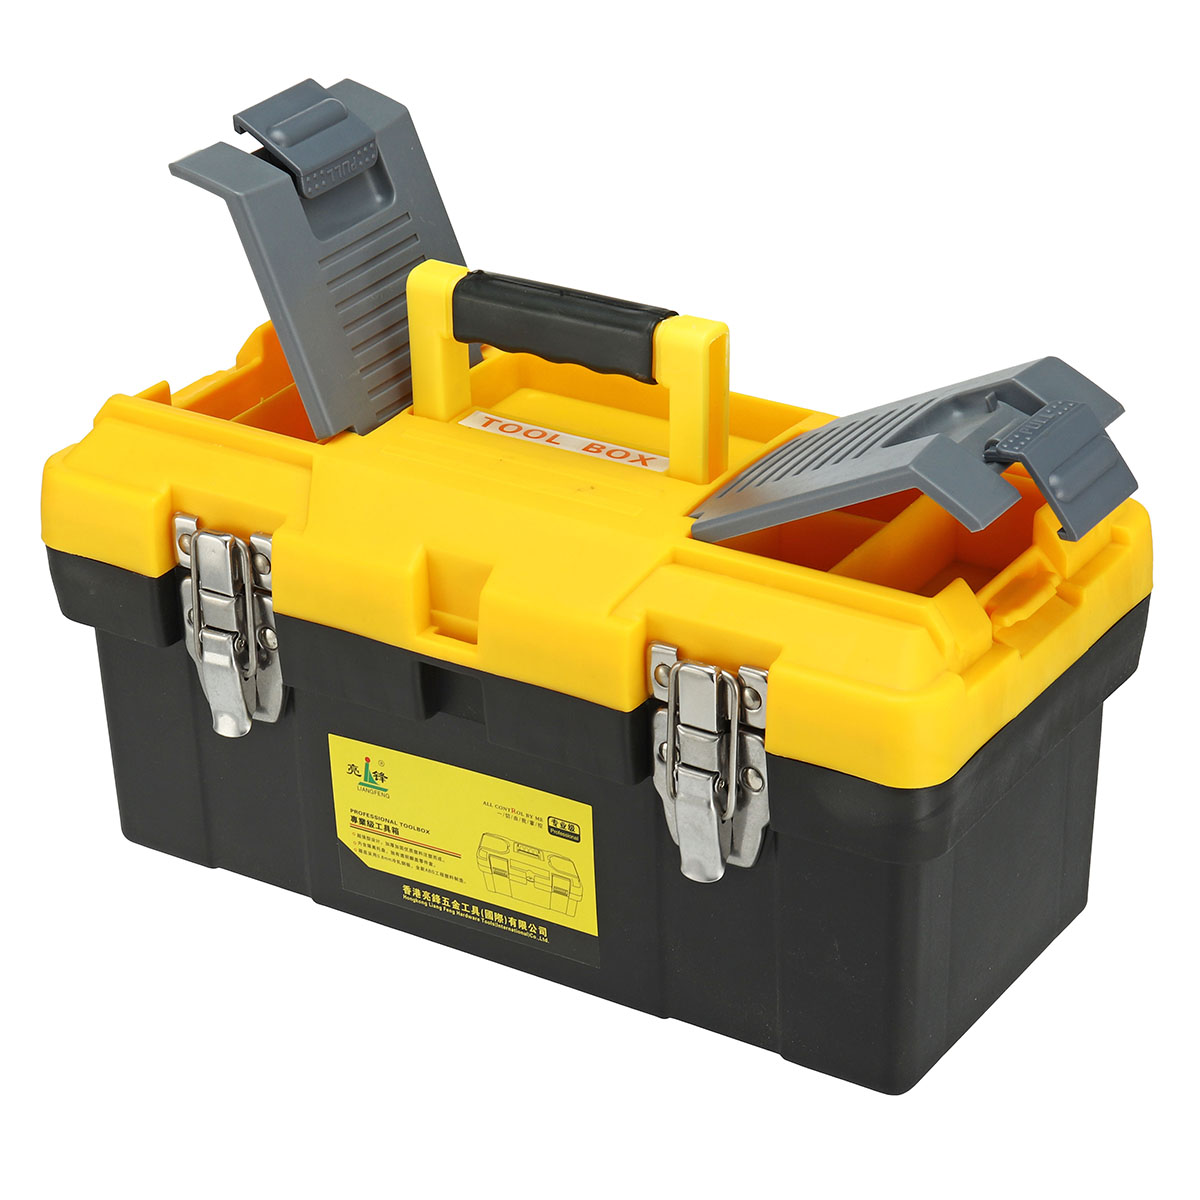 14/17/19 Inch Plastic Work Tools Storage Box Protable Carrying Case Handle Accessories Holder